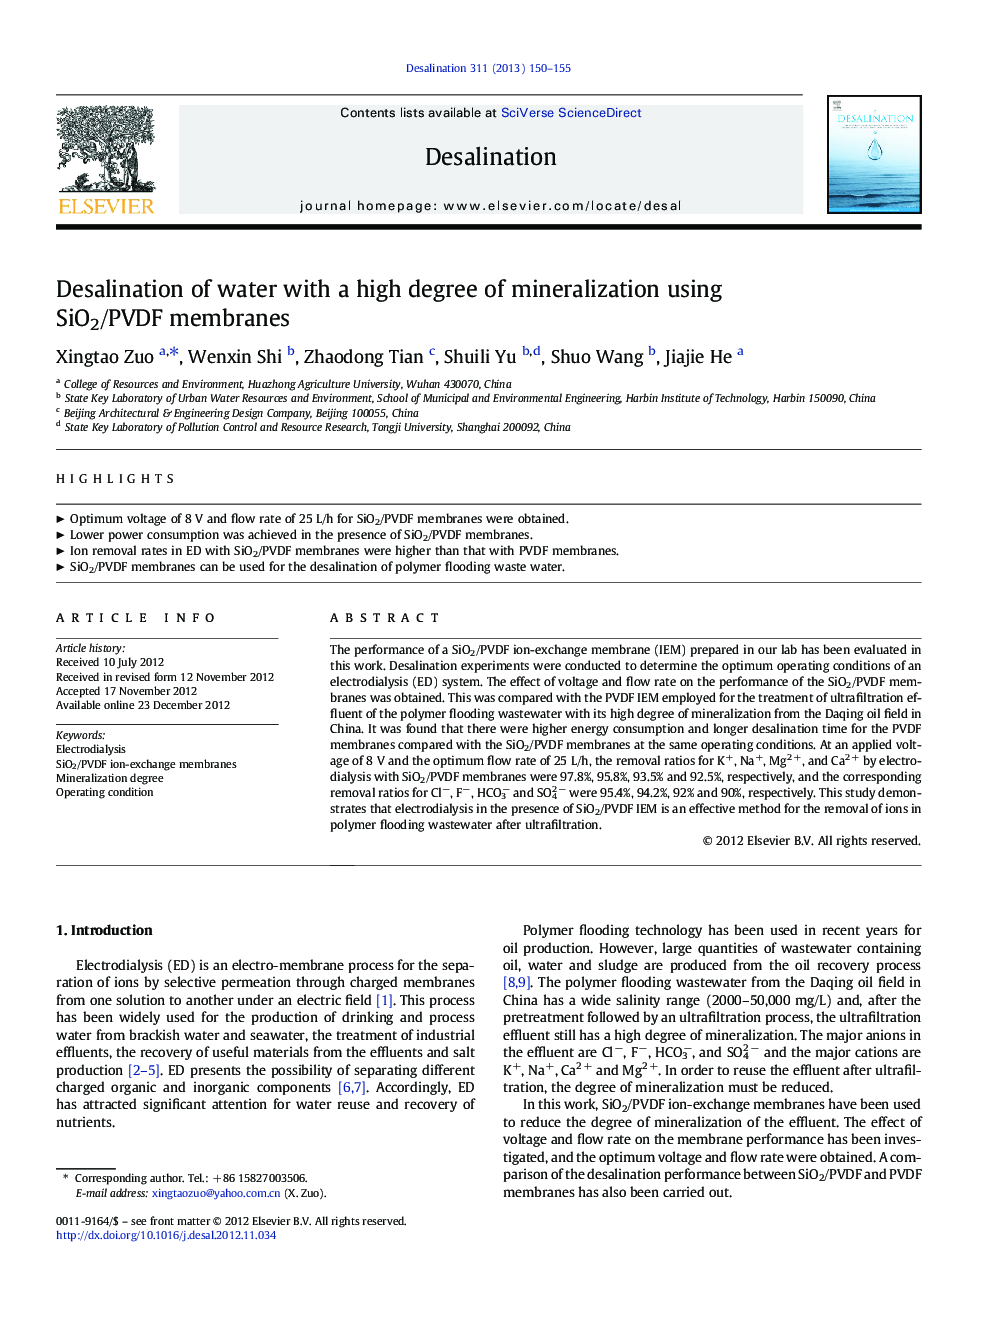 Desalination of water with a high degree of mineralization using SiO2/PVDF membranes